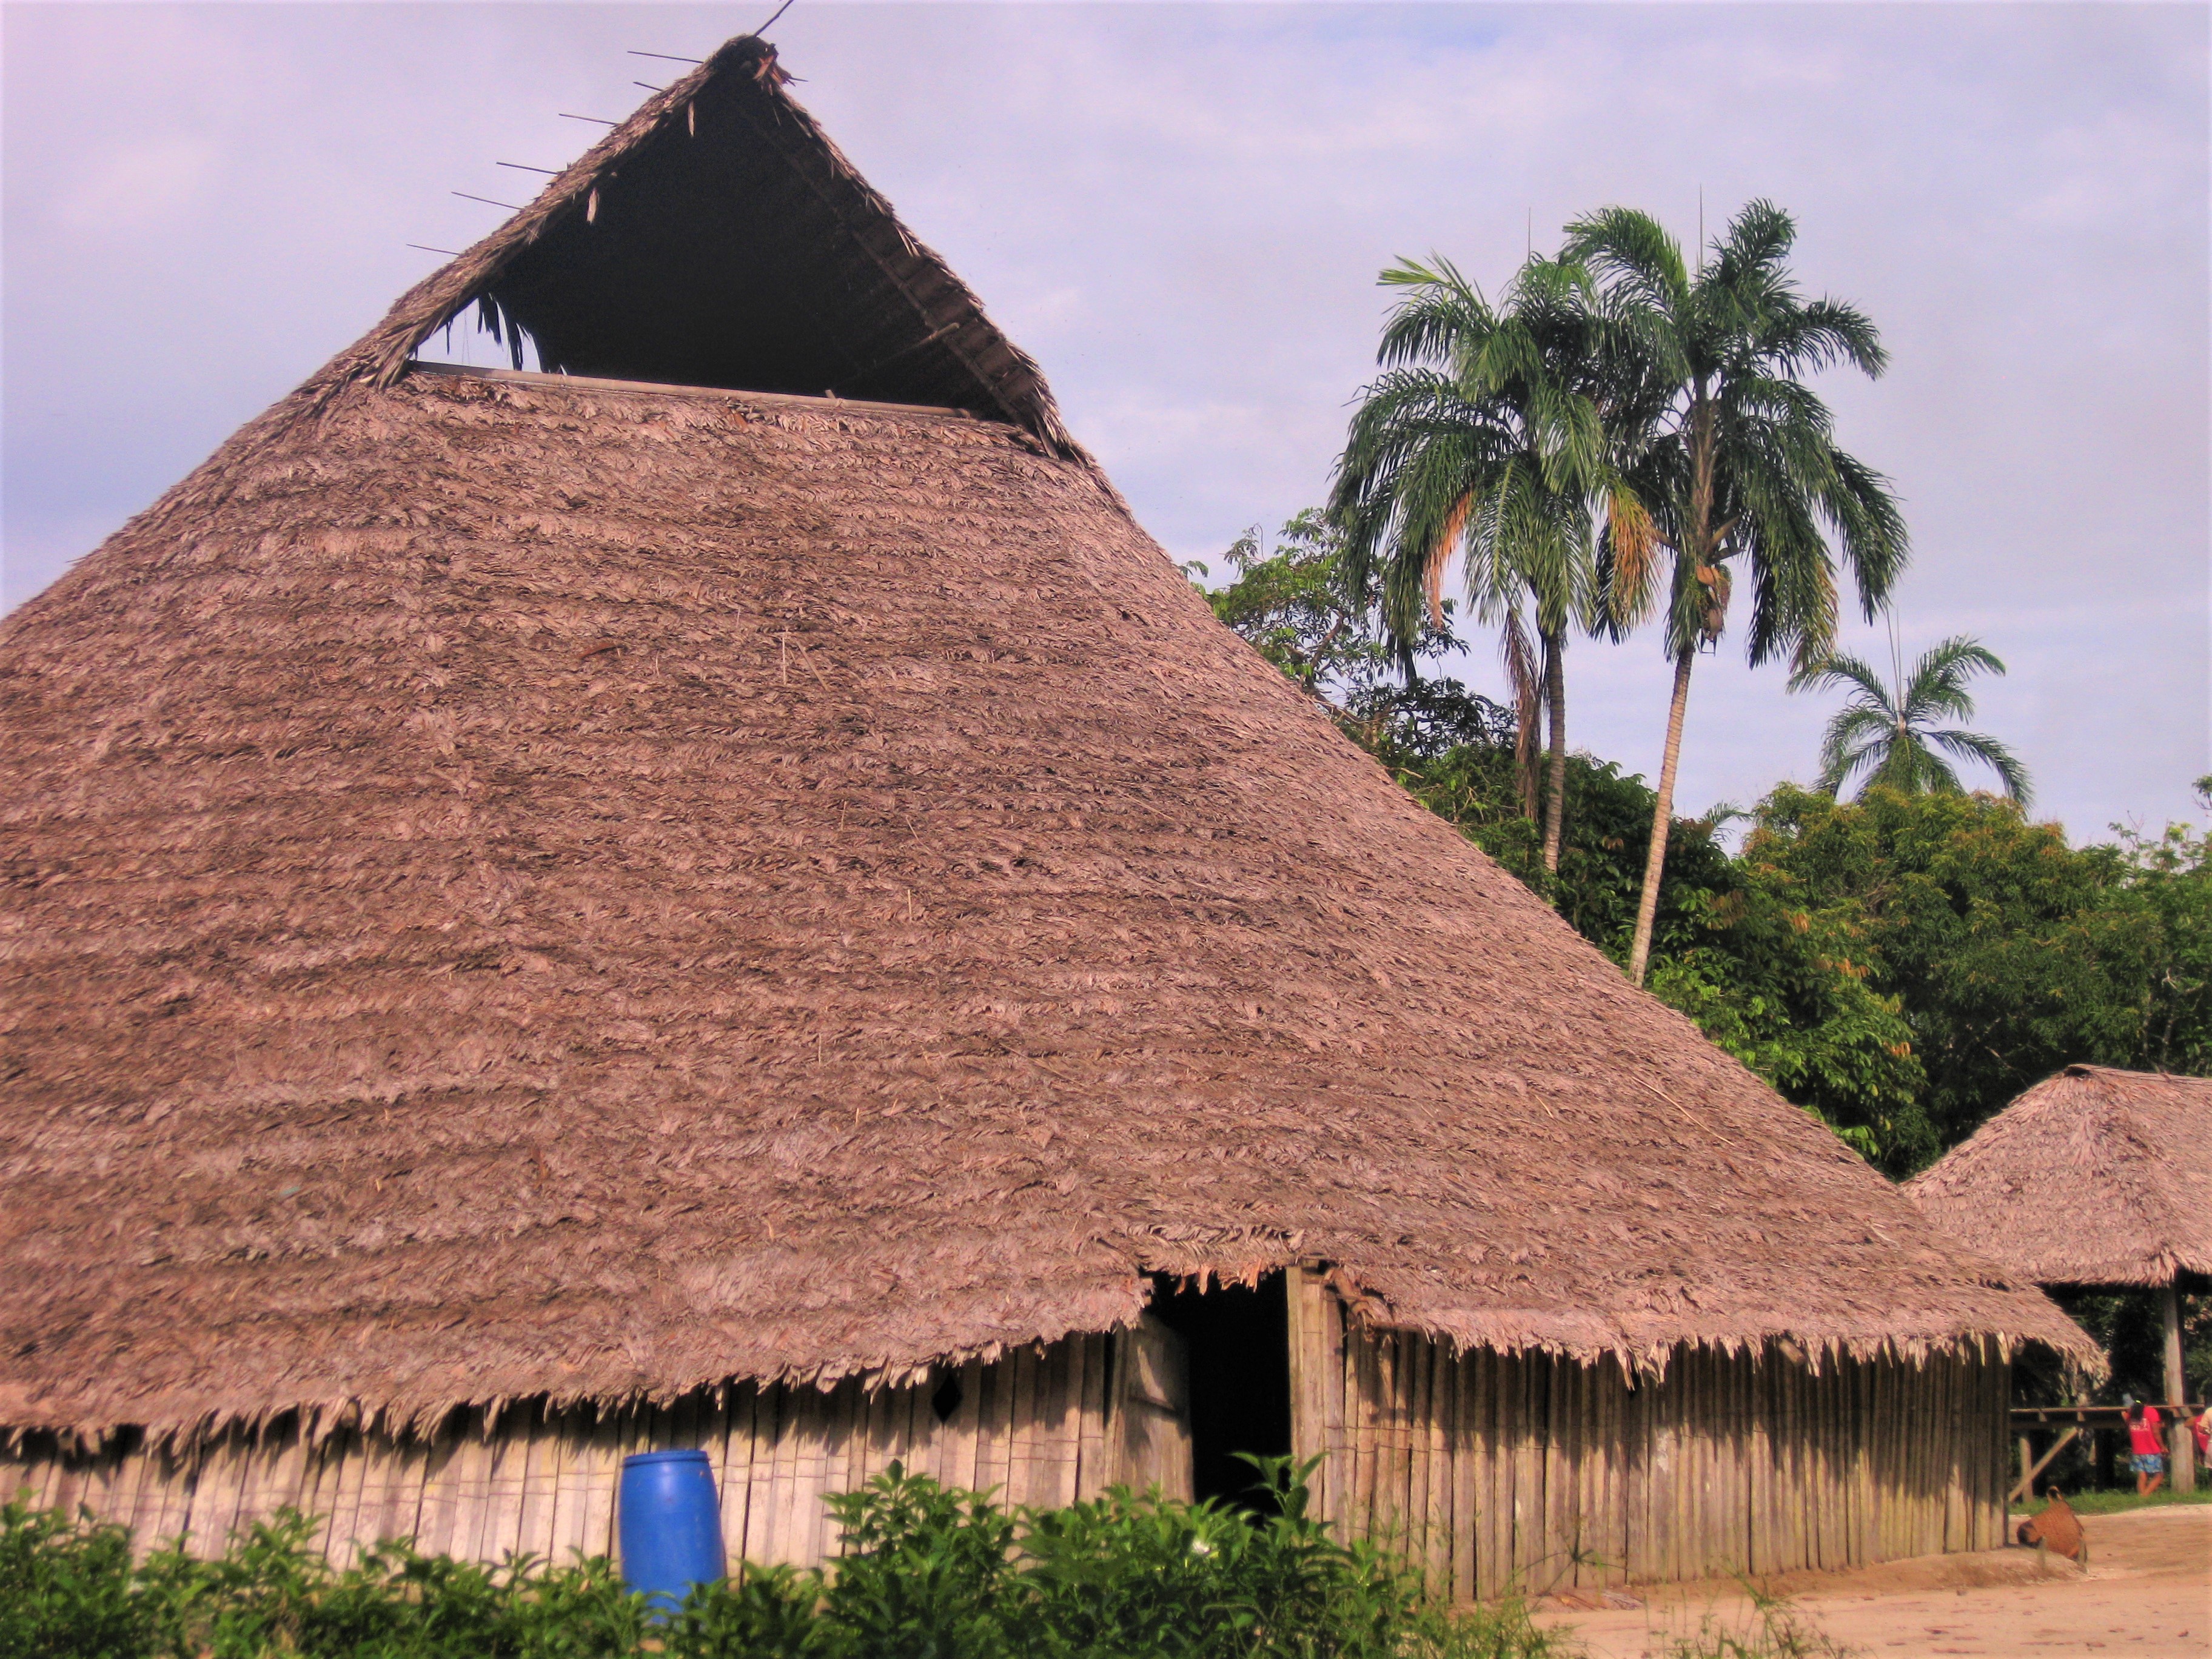 Amazonian thatched roundhouse with palm trees behind it